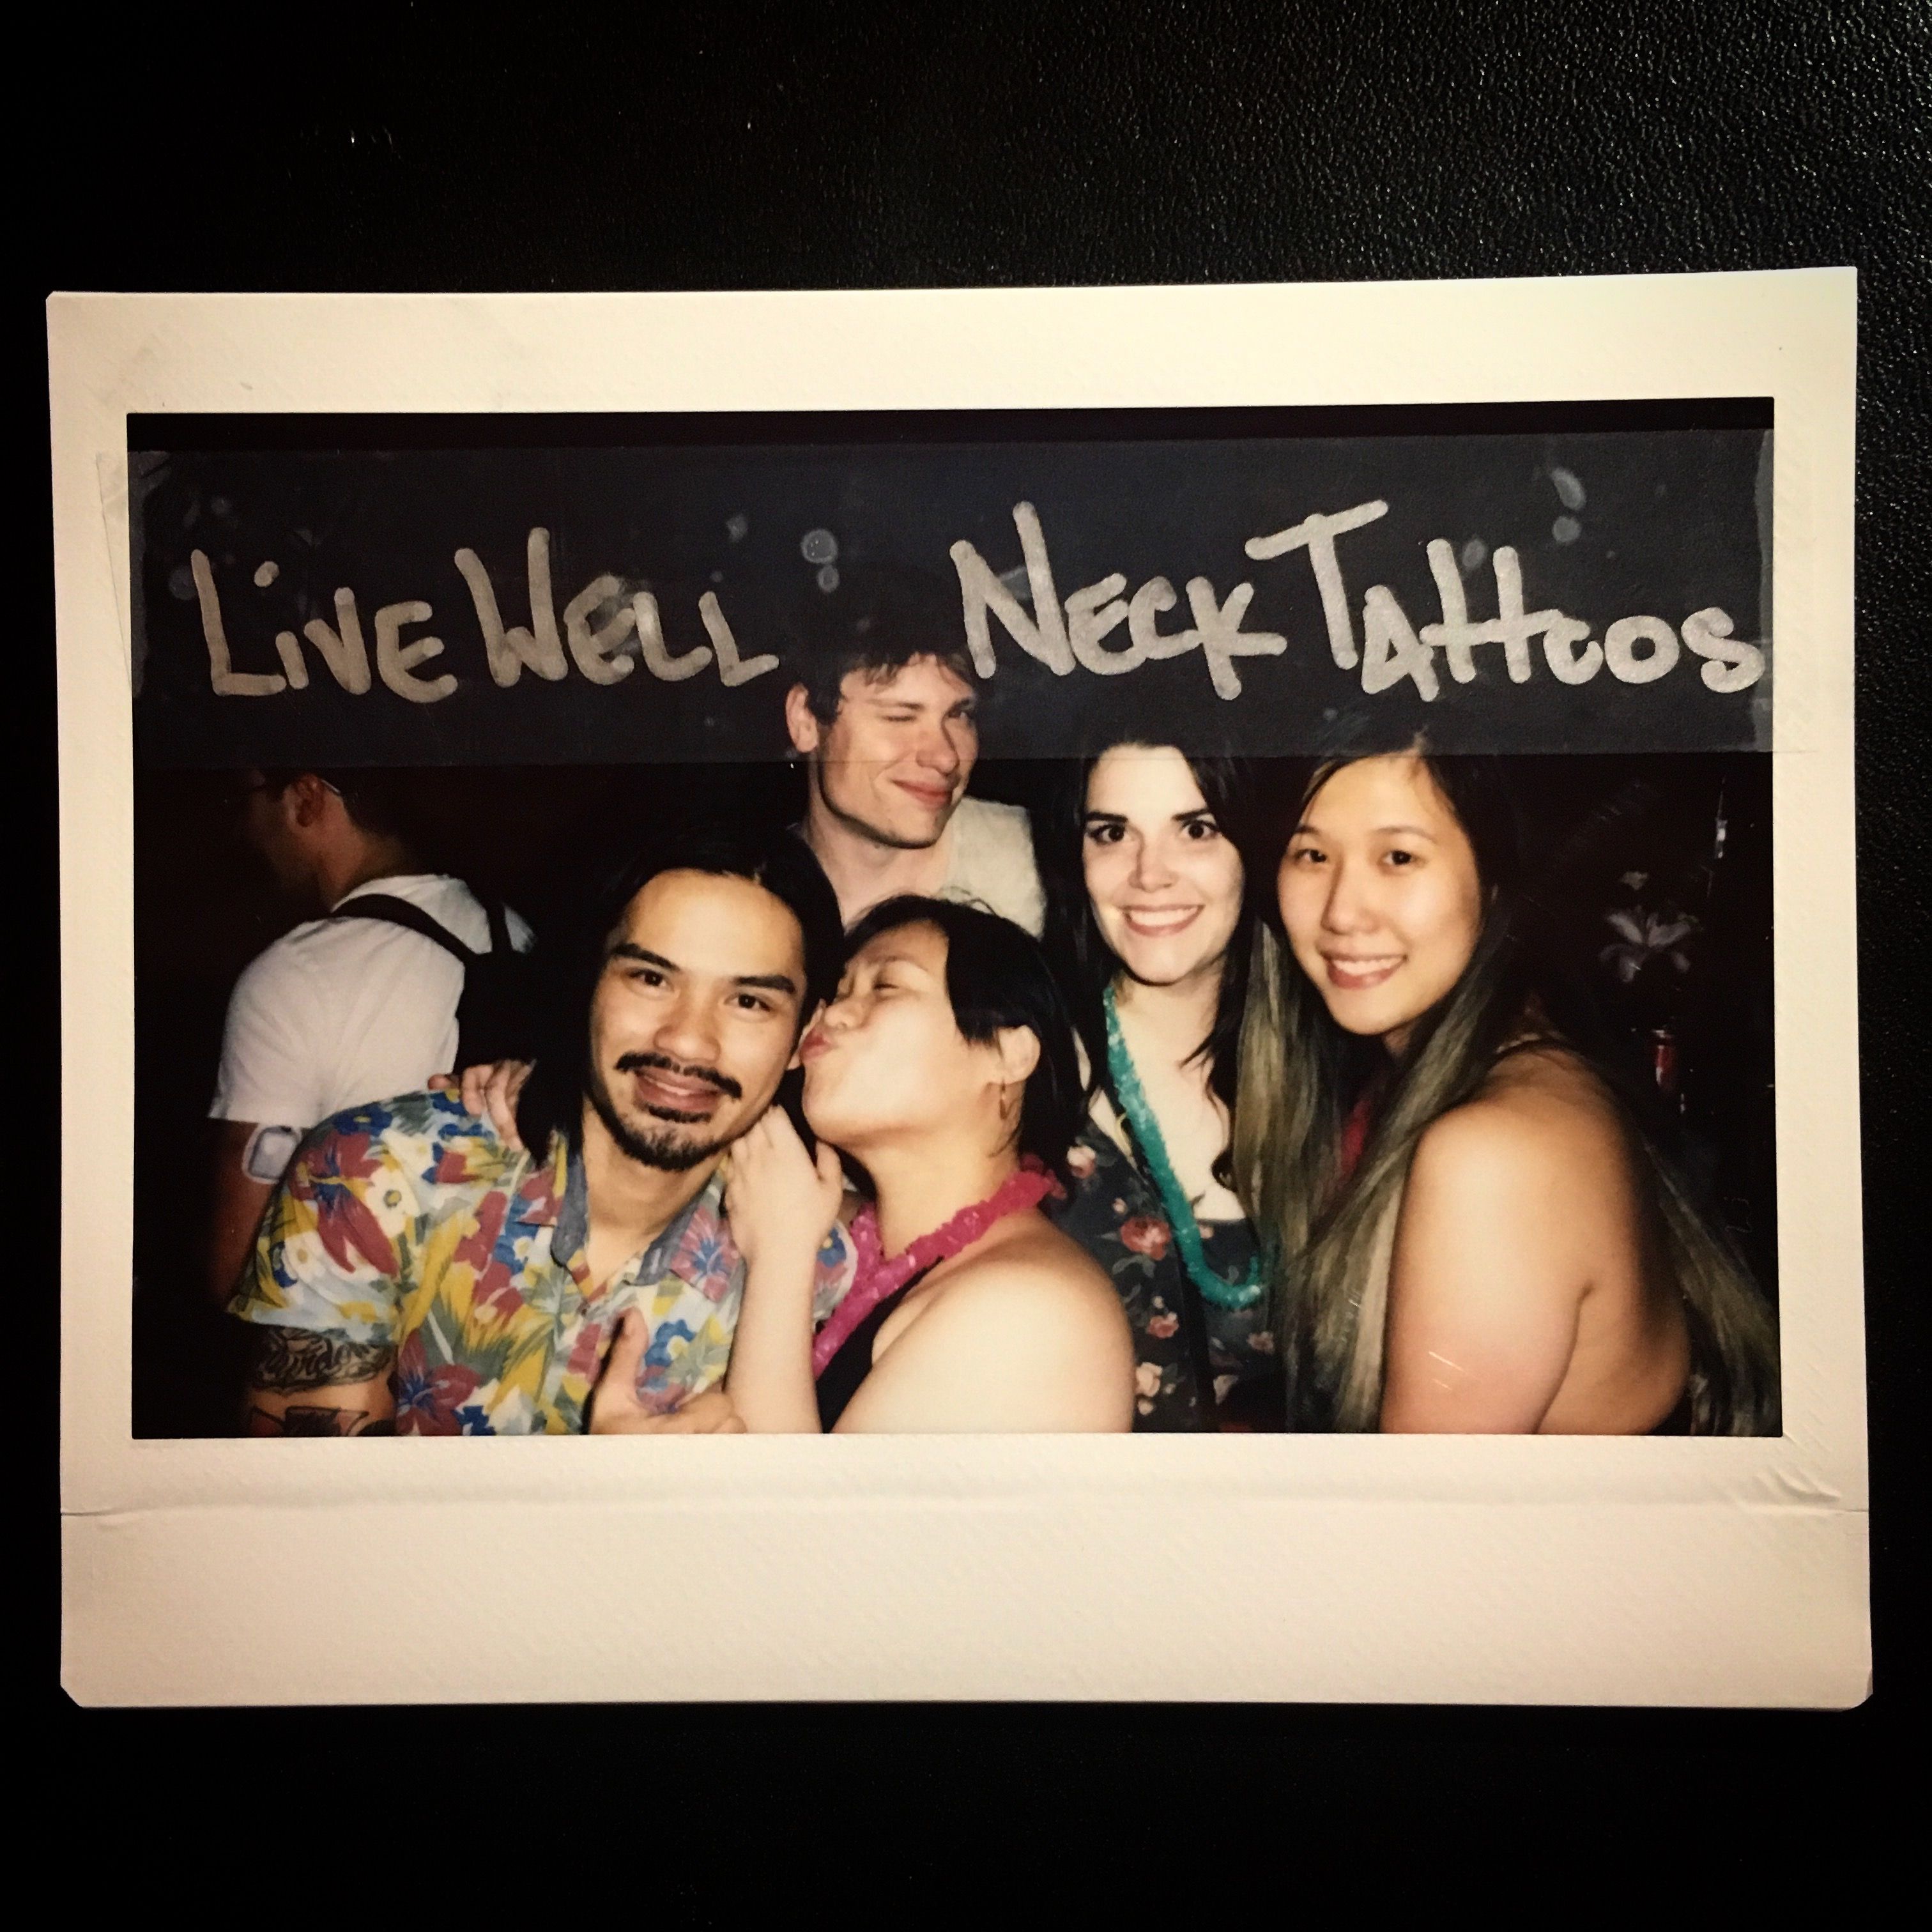 Live Well – “Neck Tattoos”